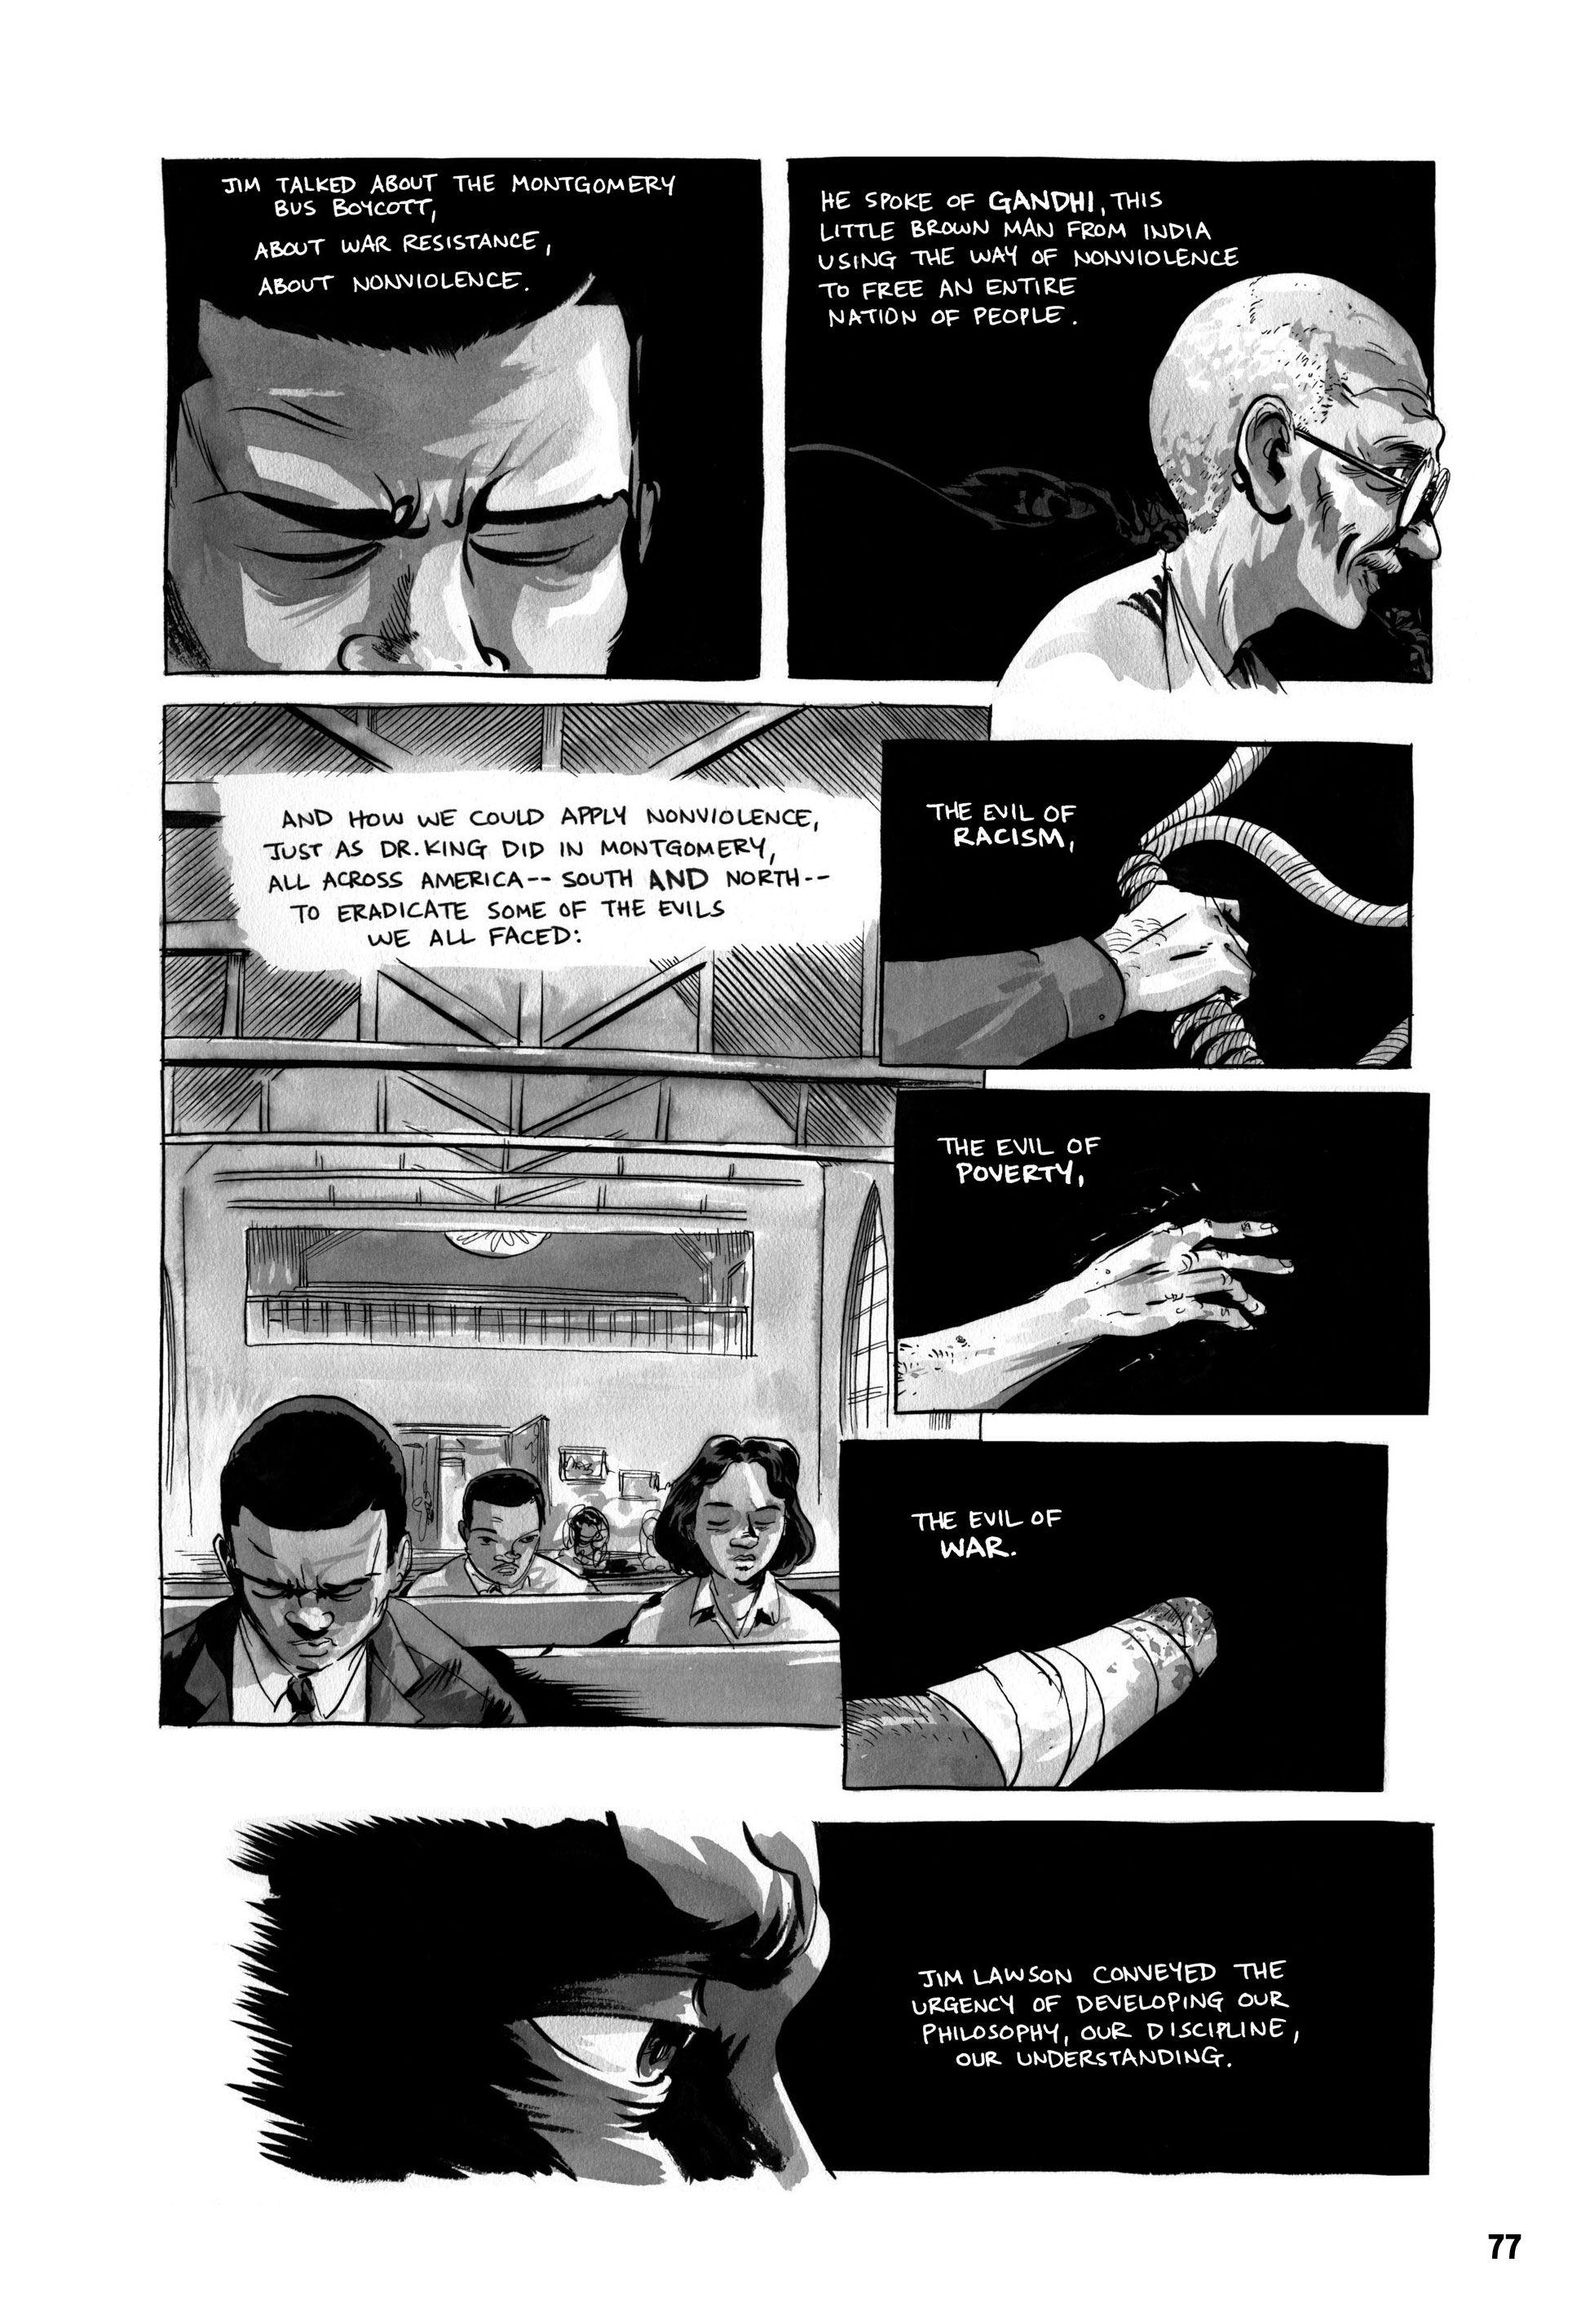 Several comic book style drawings about ending the evils of racism, poverty, and war